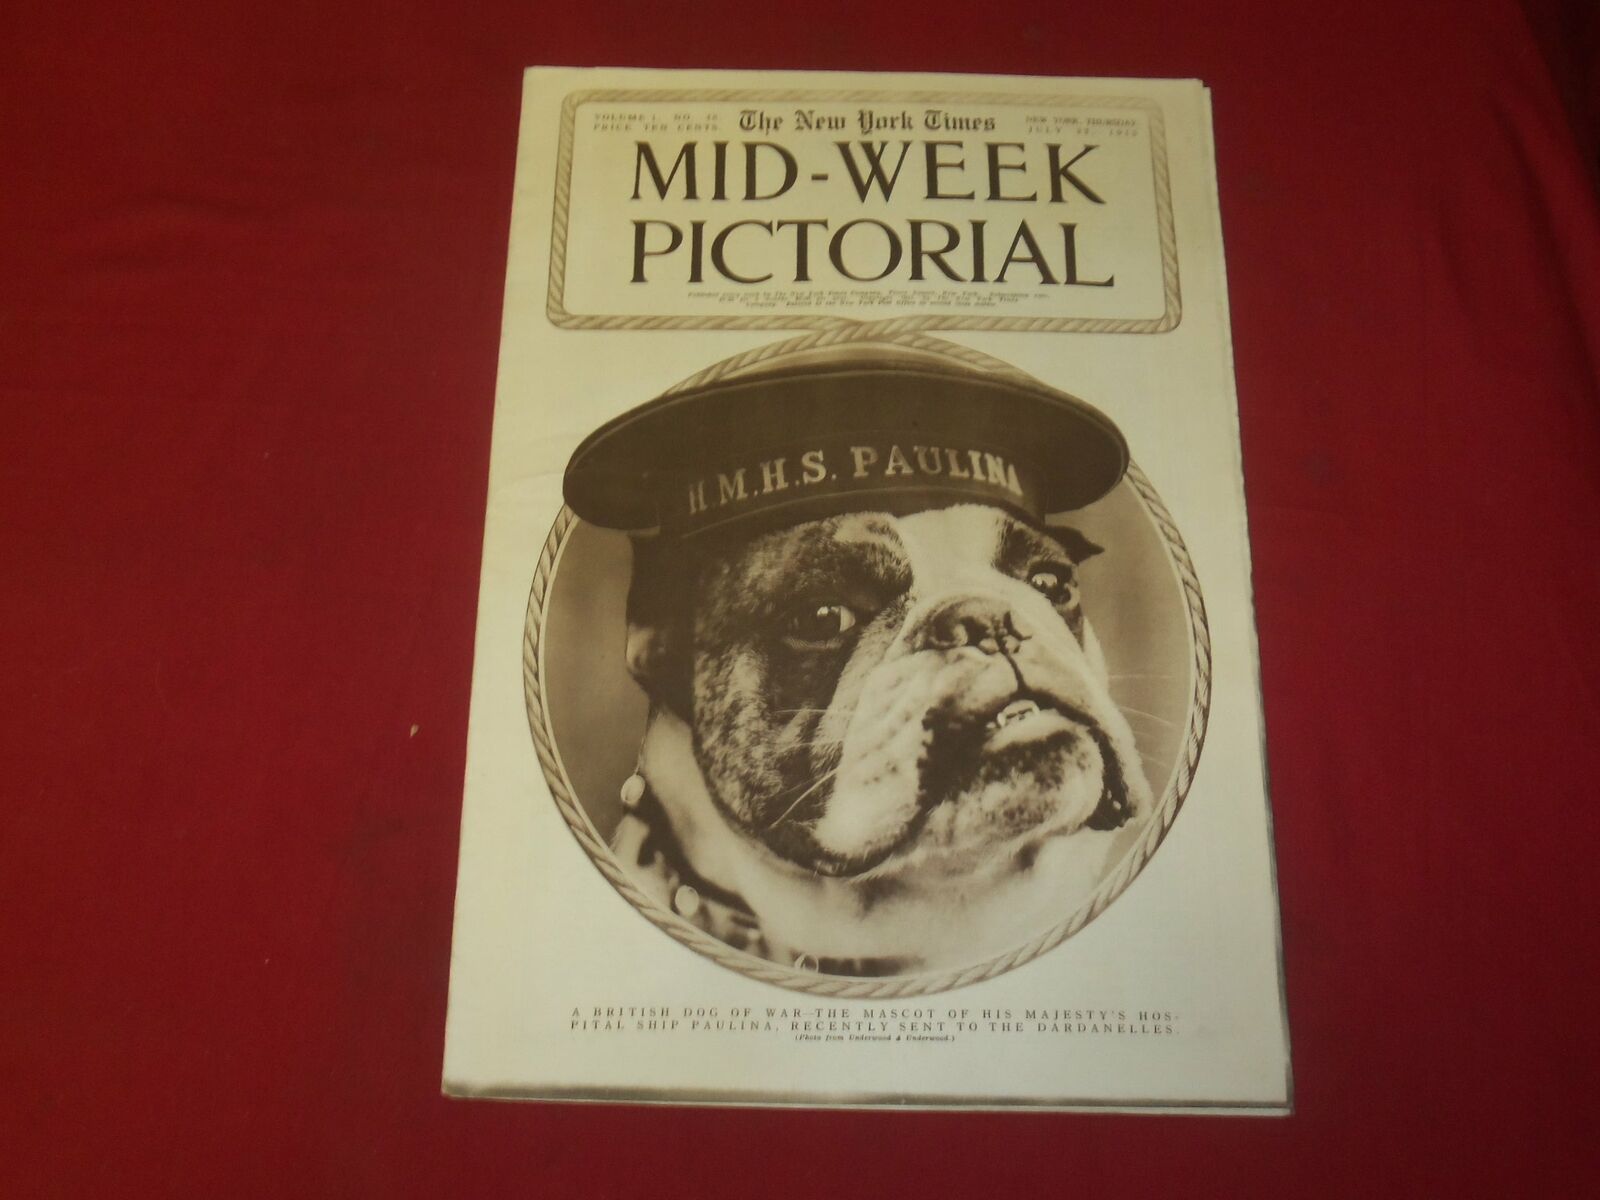 1915 JULY 22 NY TIMES PICTORIAL SECTION - BRITISH DOG OF WAR MASCOT - NP 3963